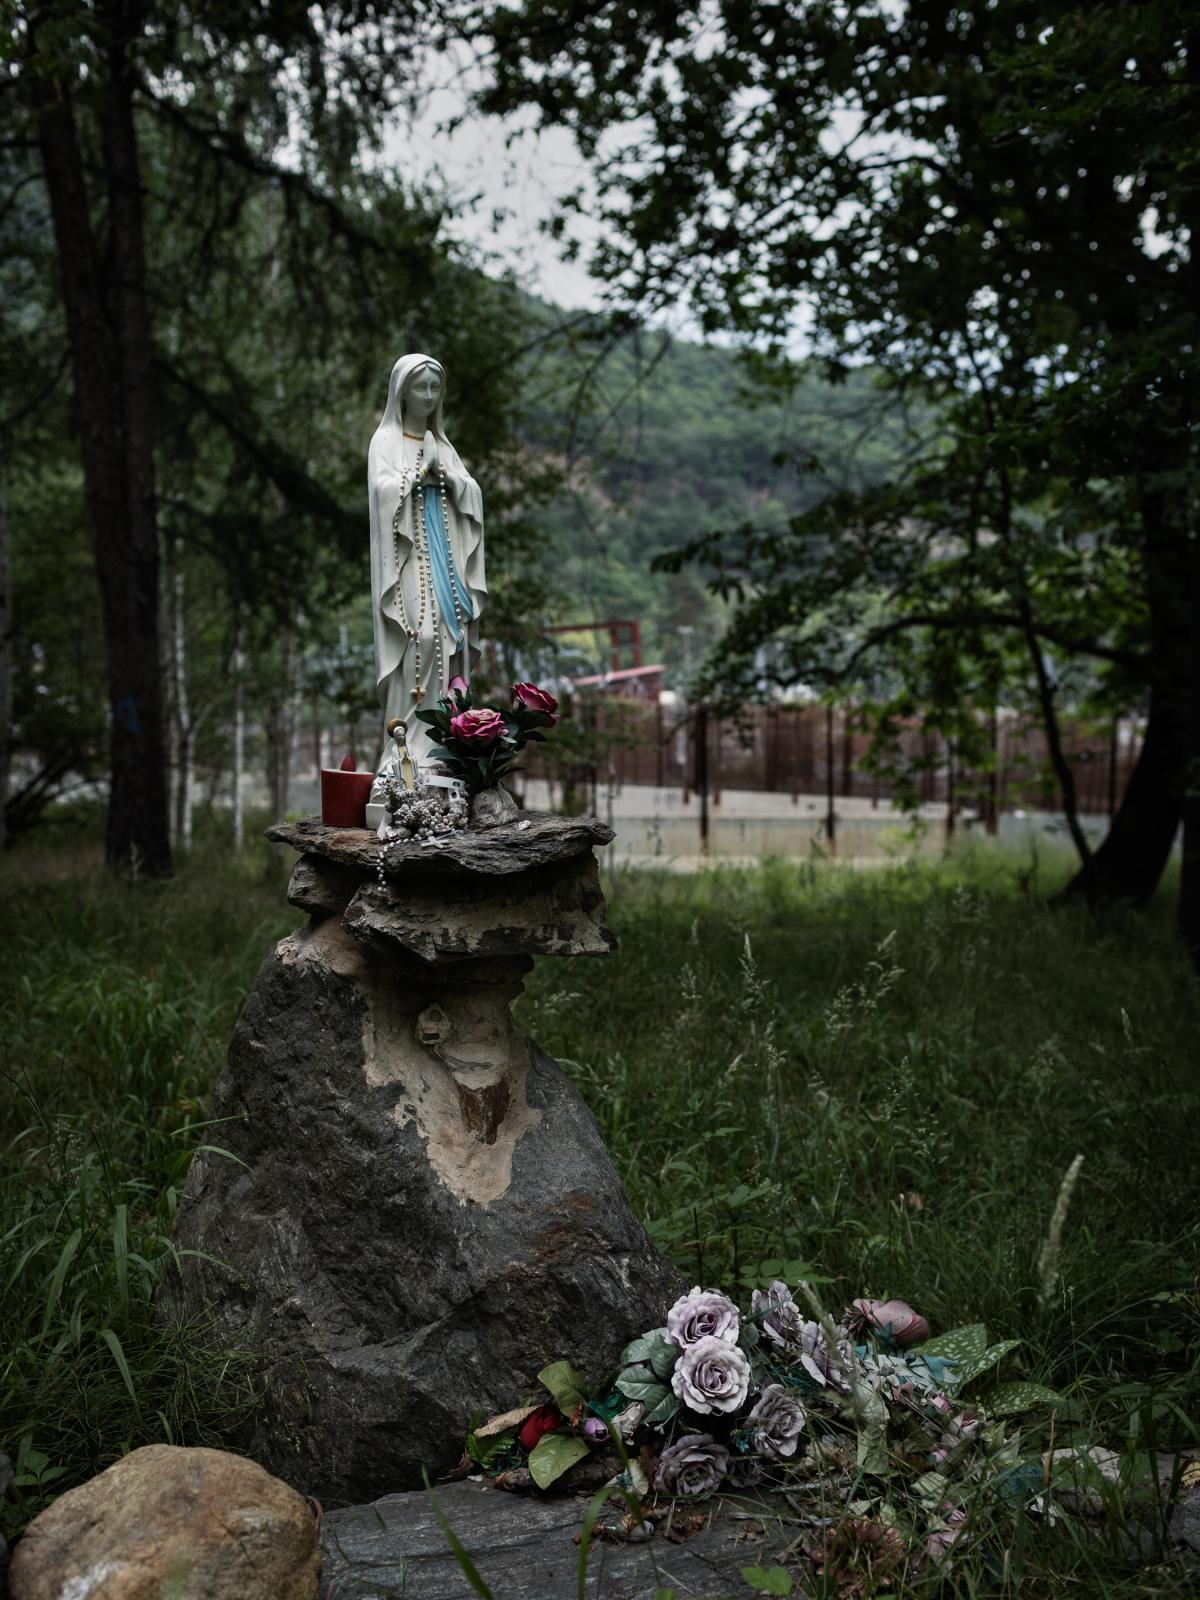 We are still dreaming  - A Statue of Our Lady, a symbolic and pilgrimage site by...